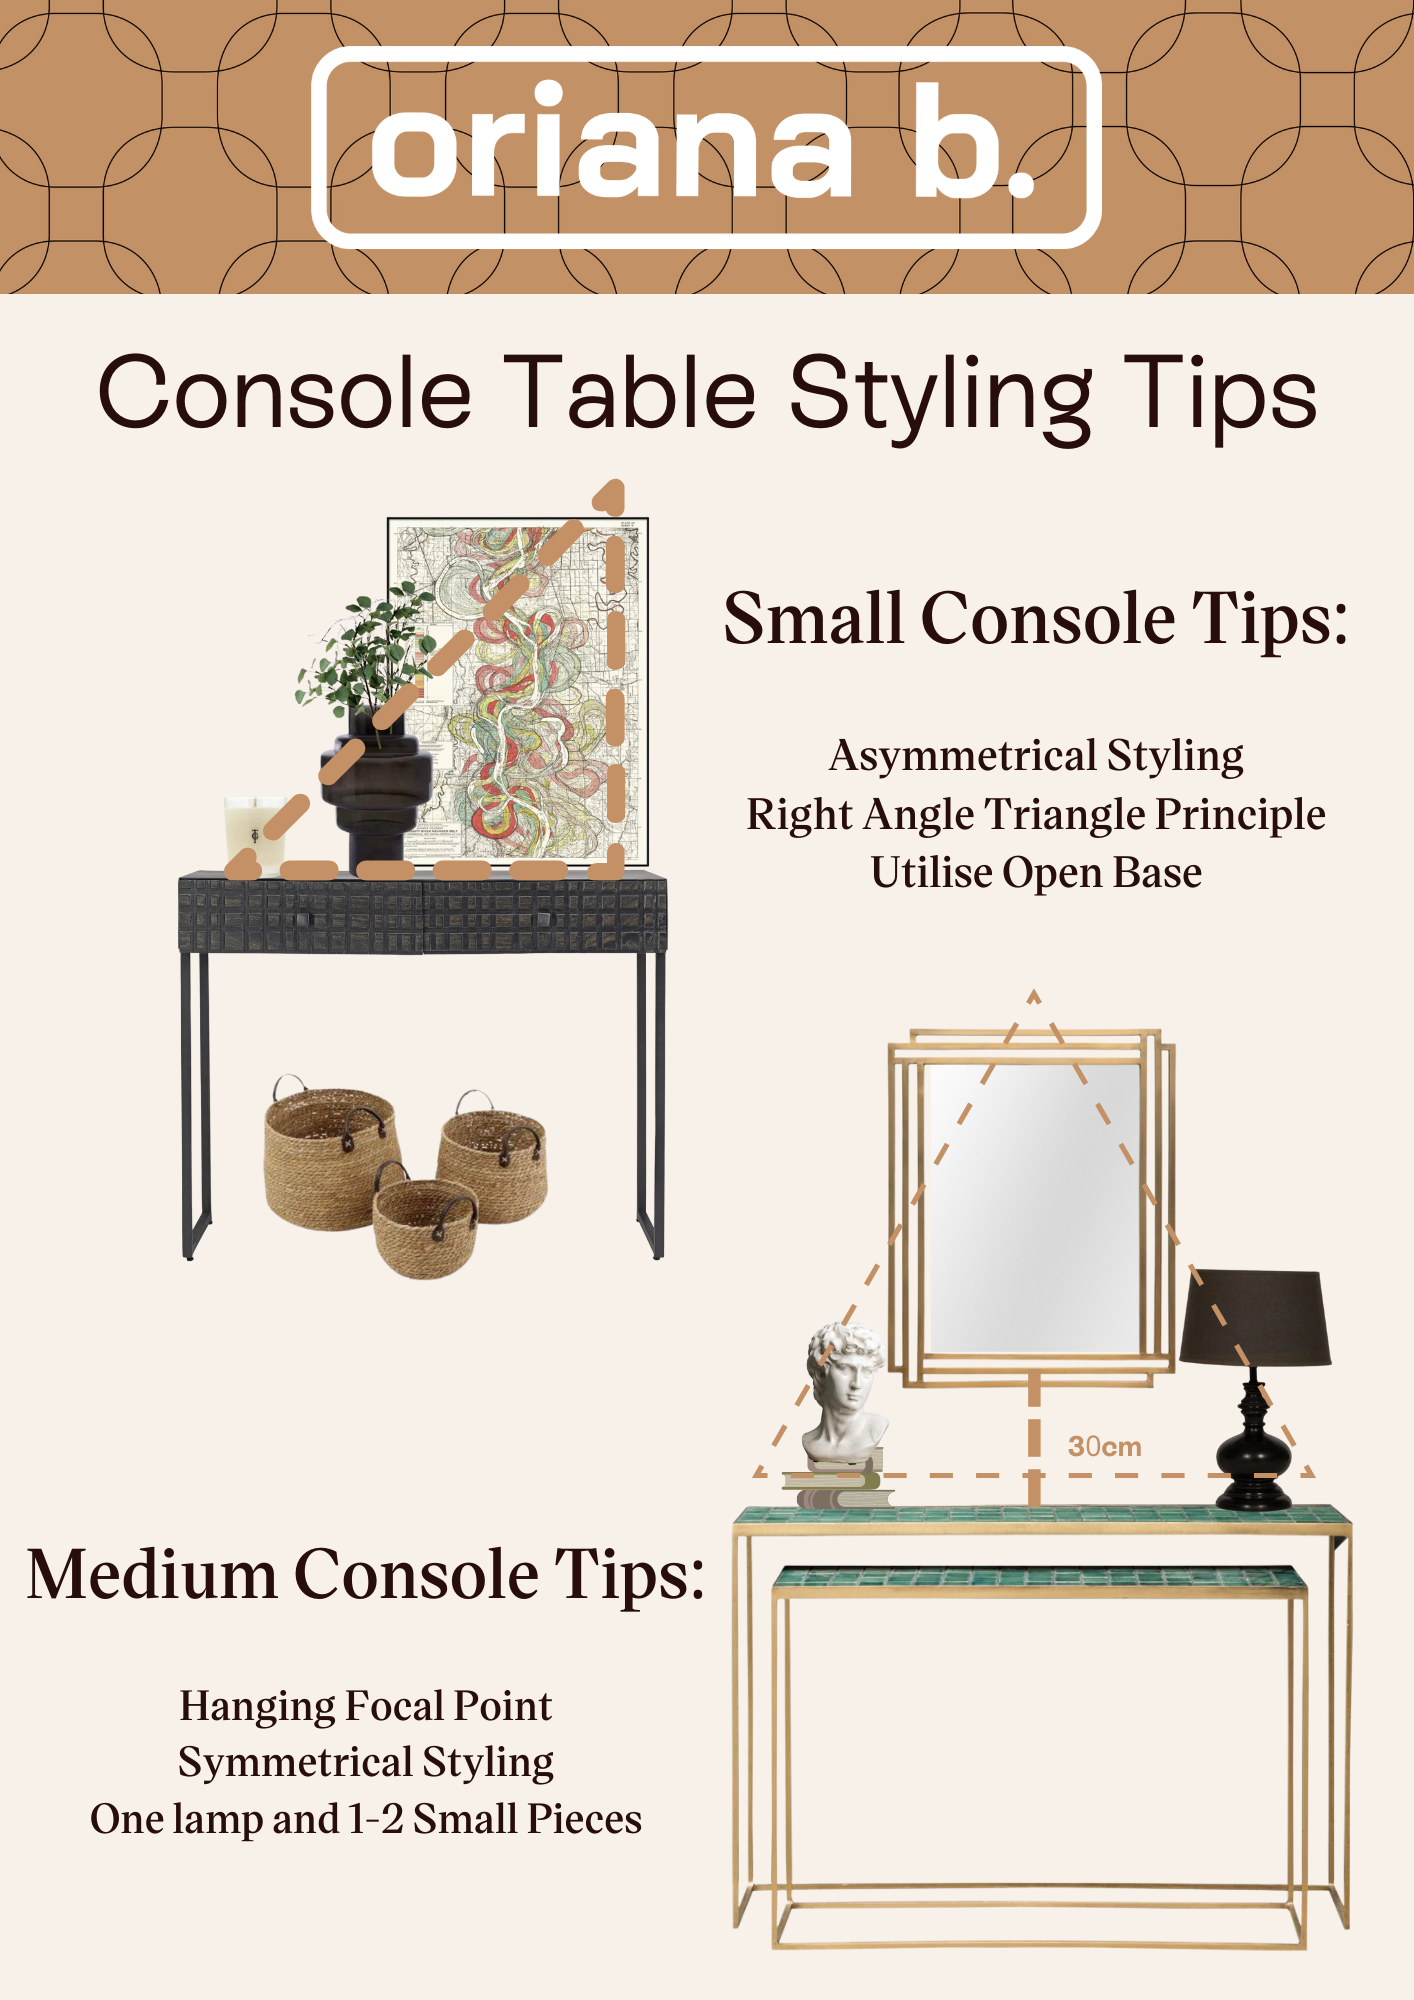 Console styling tips infographic